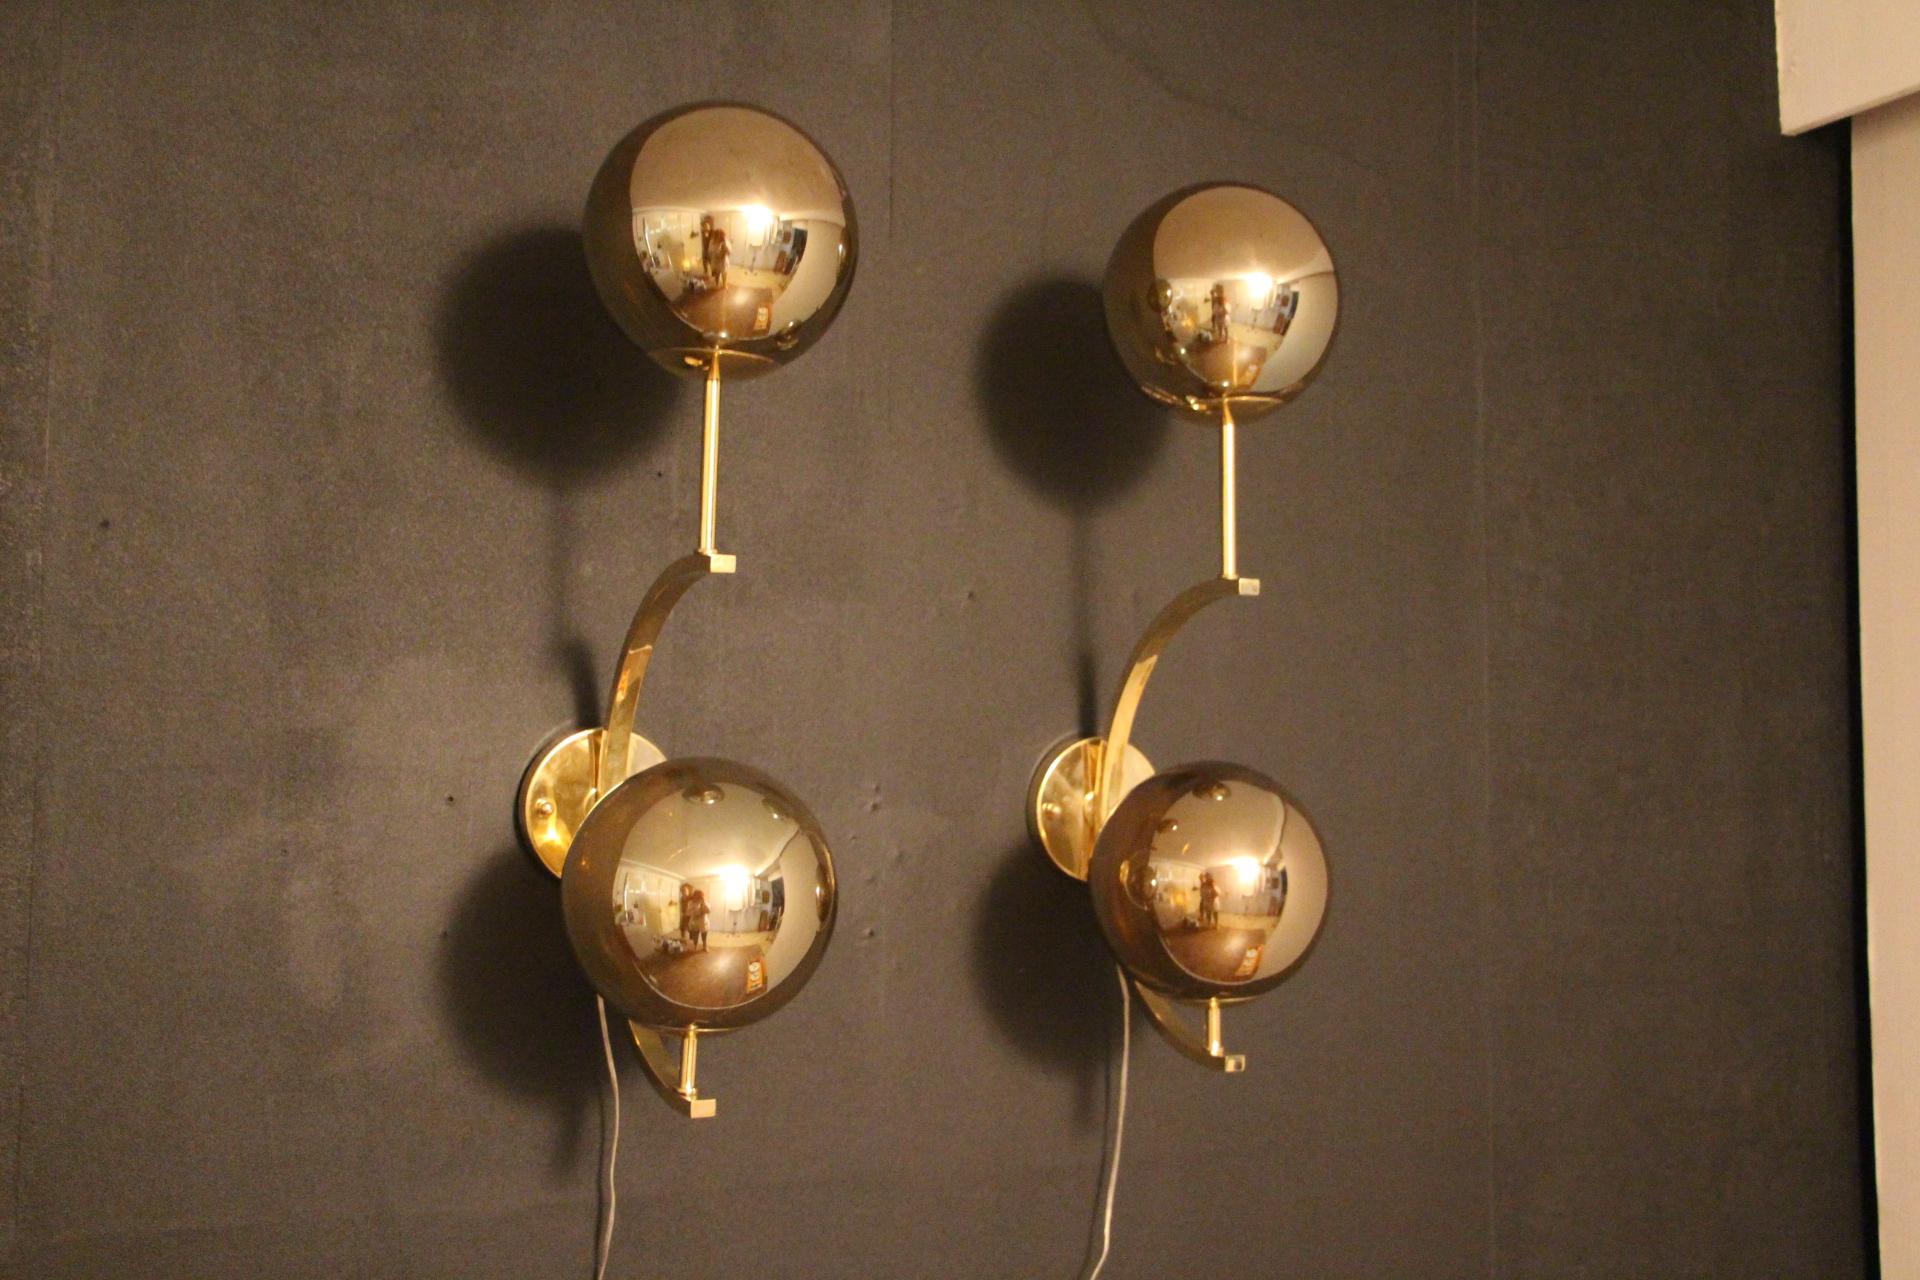 These sconces are very elegant with their brass frame and mercurised Murano glass globes. These globes are reflecting like mirrors in a silver and gold tone when light is switched off. With light on, they become champagne color with inclusions of